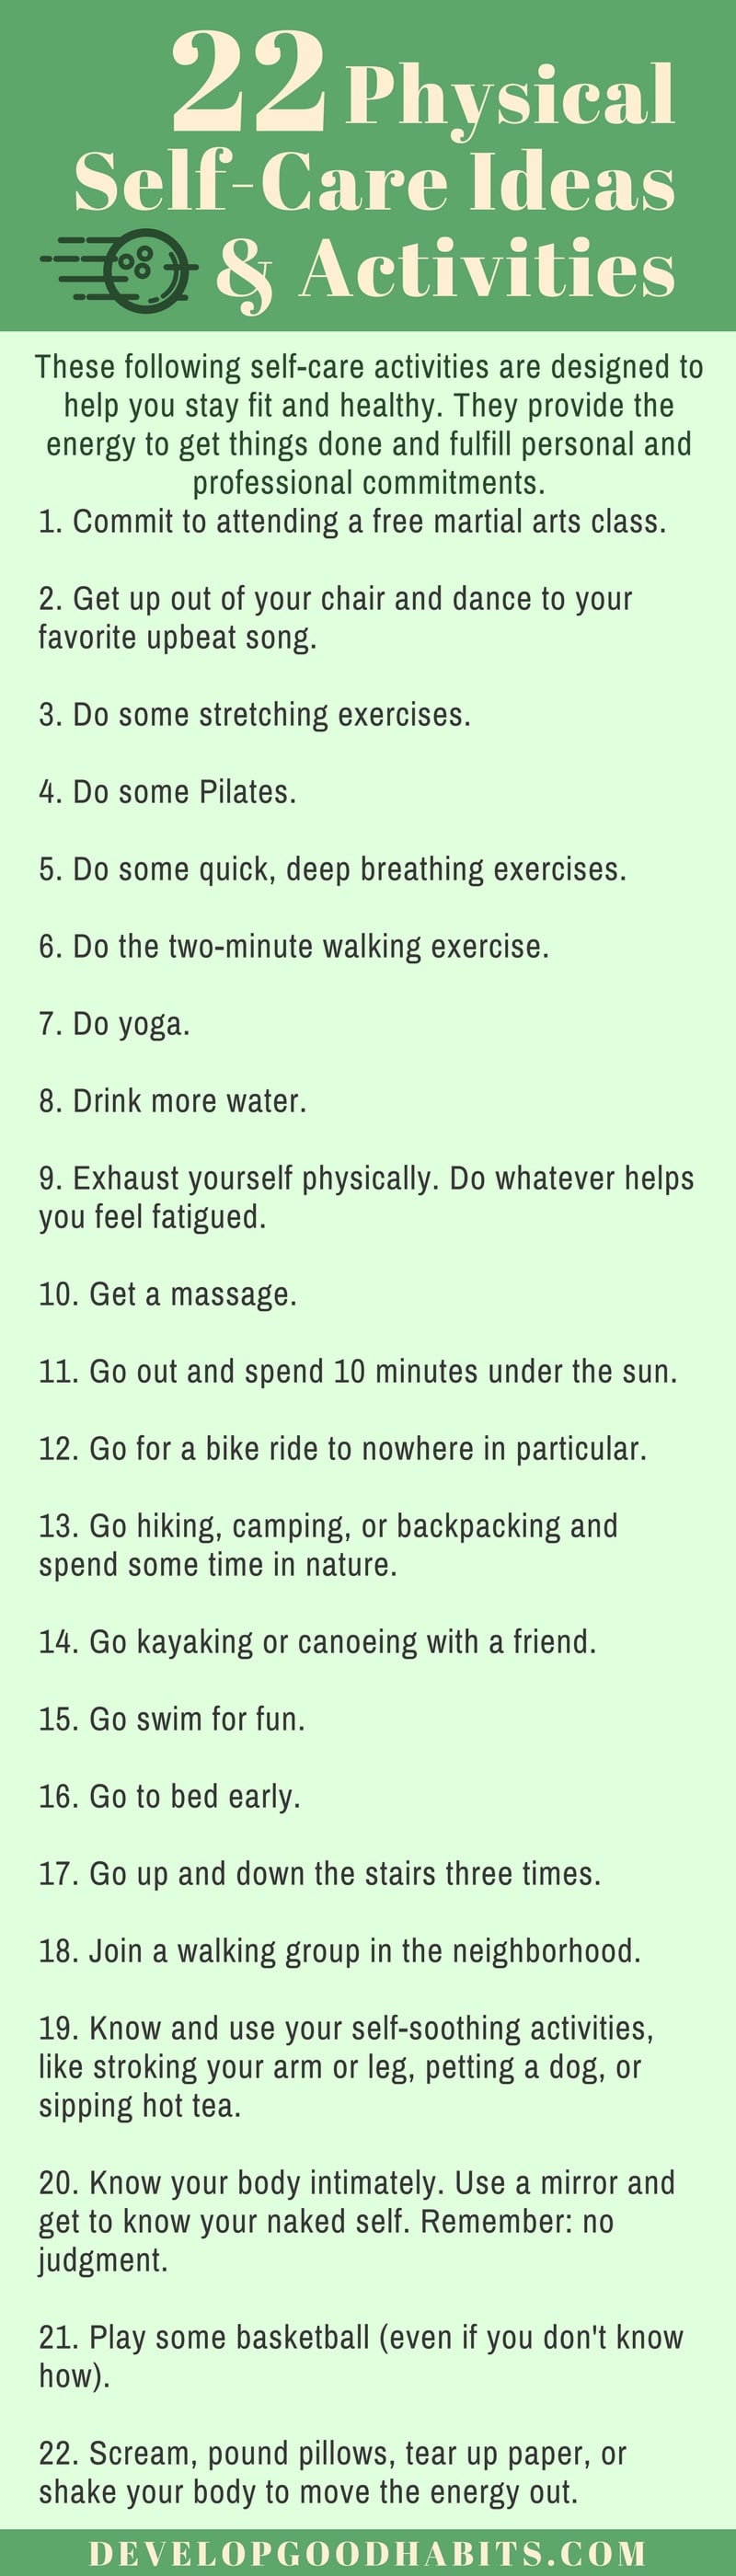 Physical Self Care Ideas and Activities